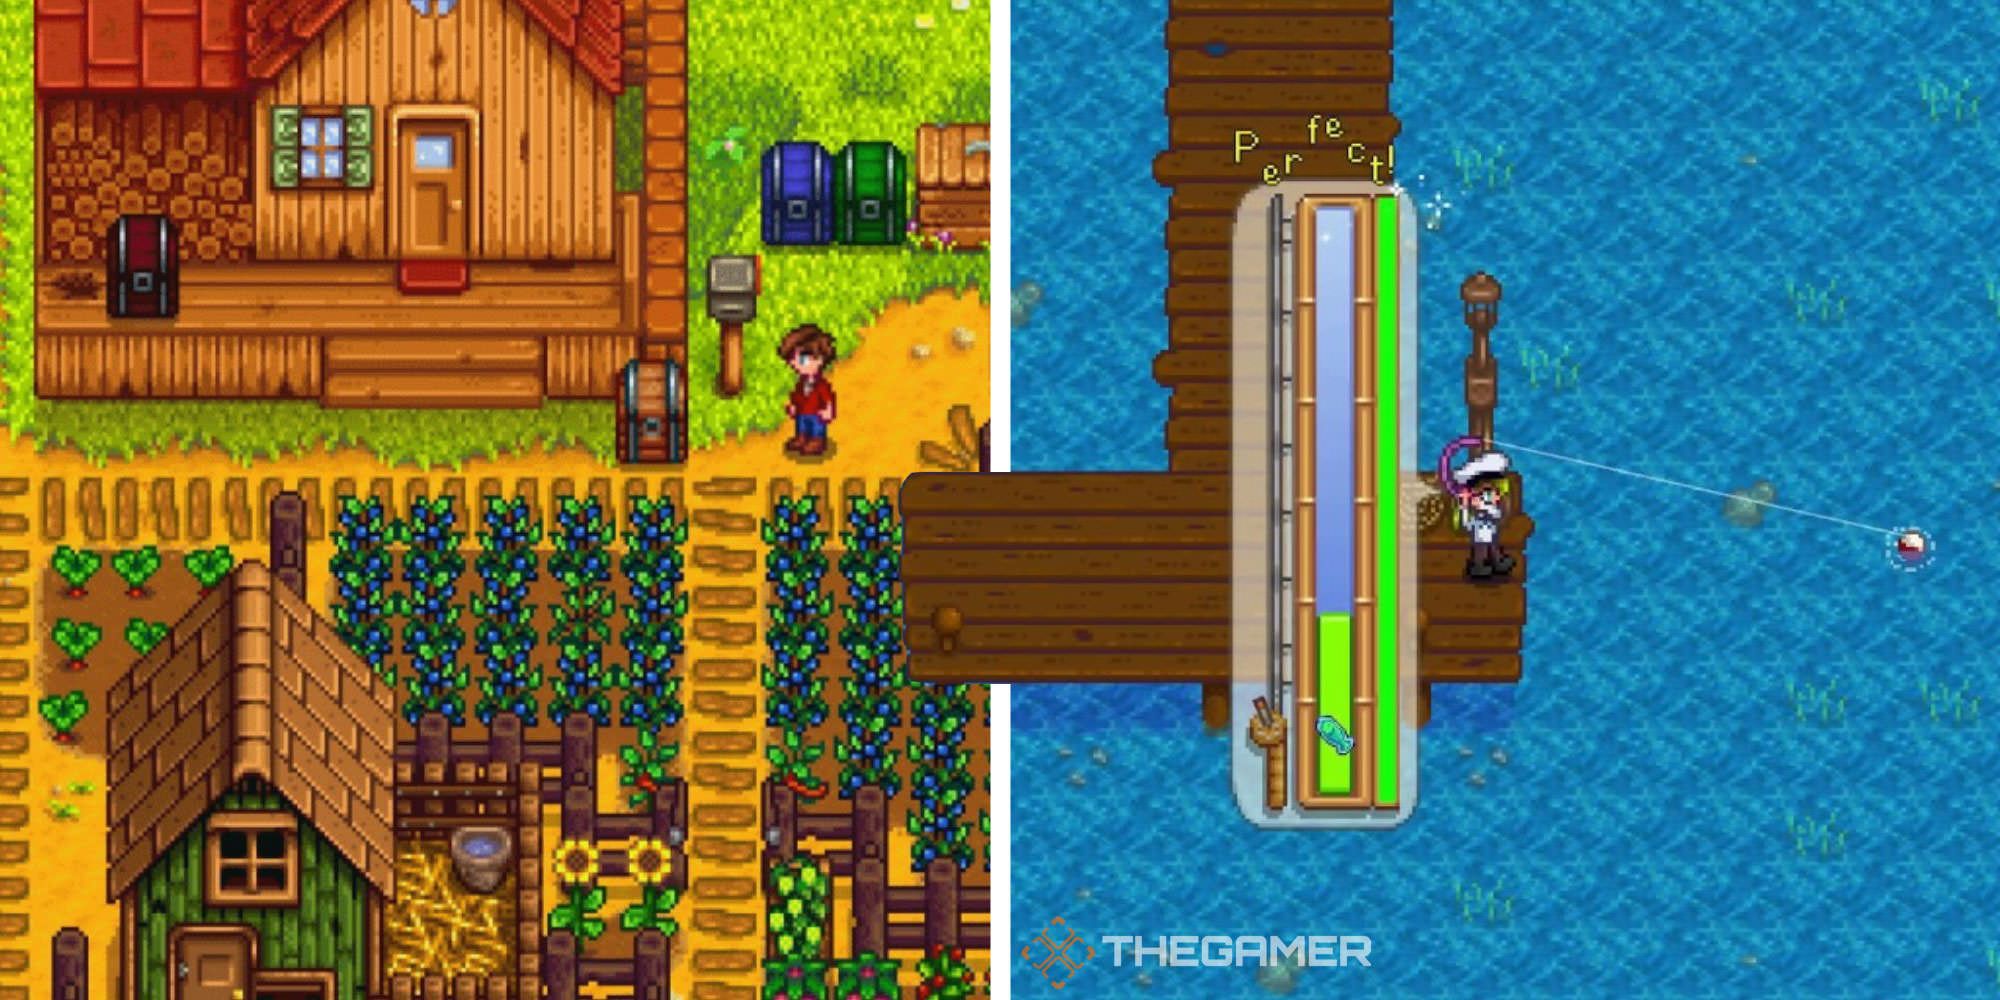 Sage Business Cases - Solo Entrepreneurship in the Video Game Industry:  What Is the Best Growth Strategy for Stardew Valley After Early Success?